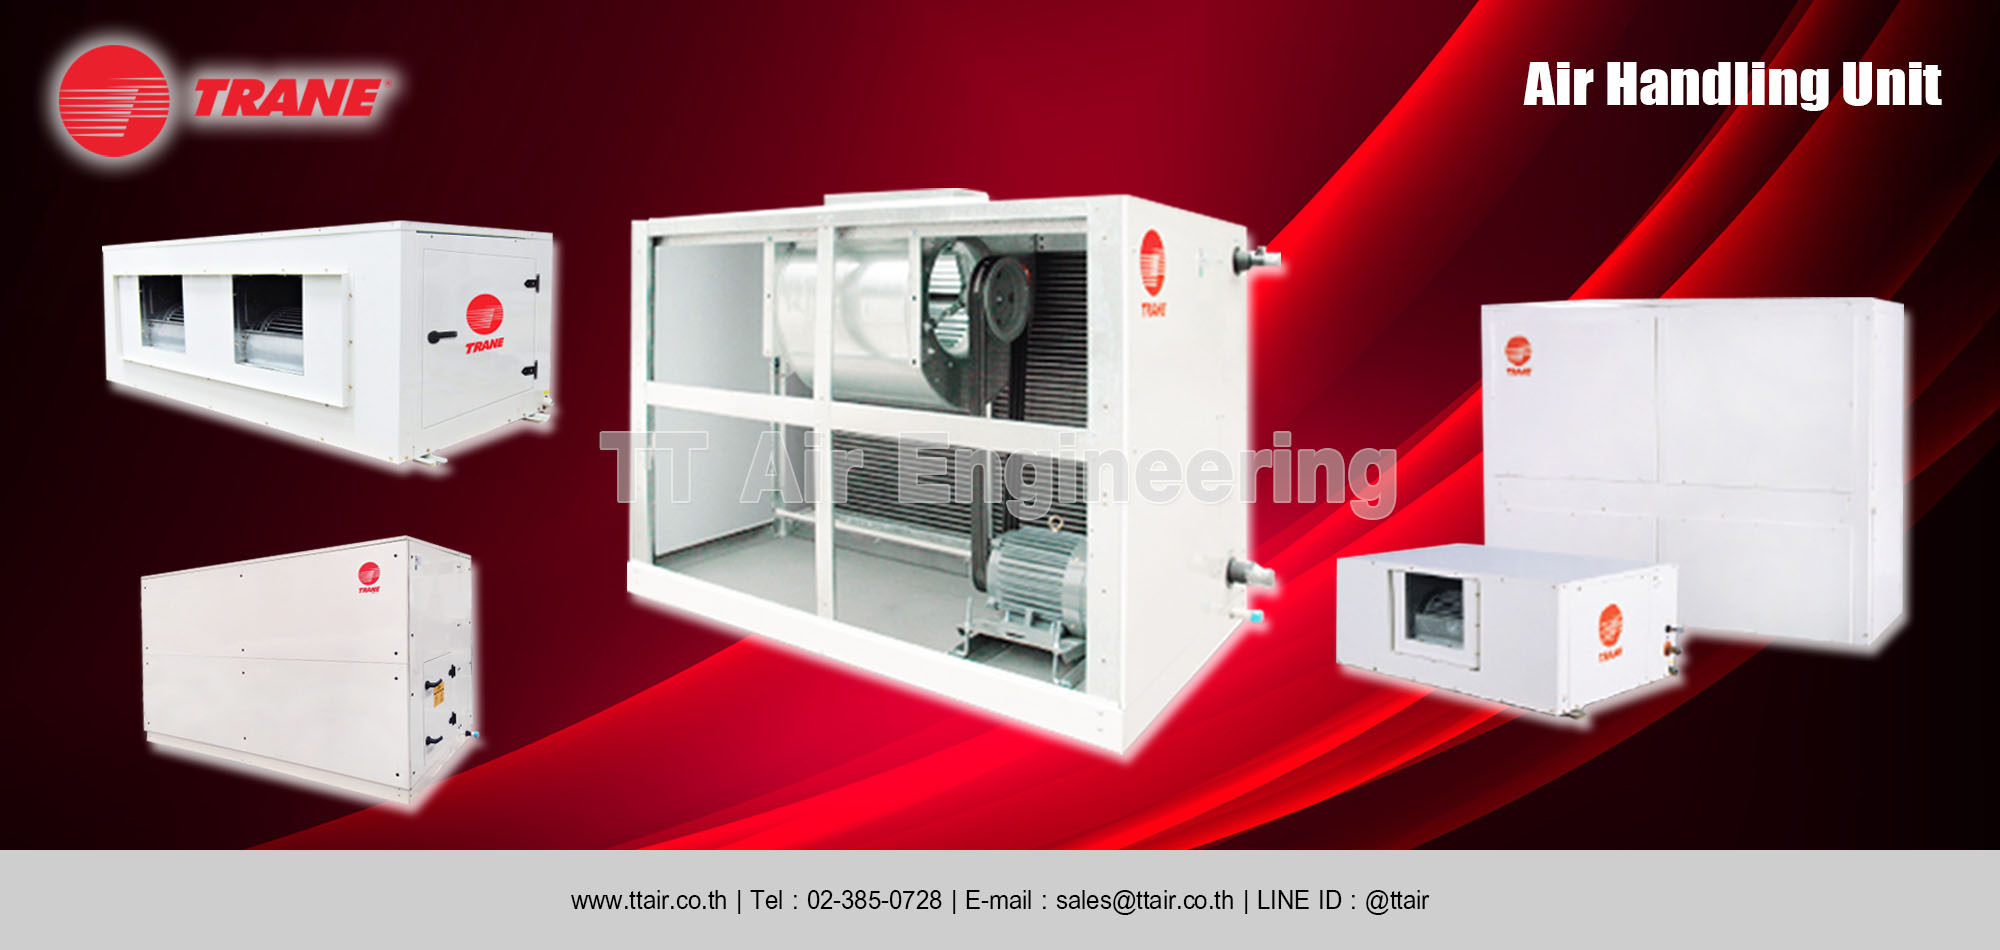 TRANE Commercial Air Handling Unit category (1)